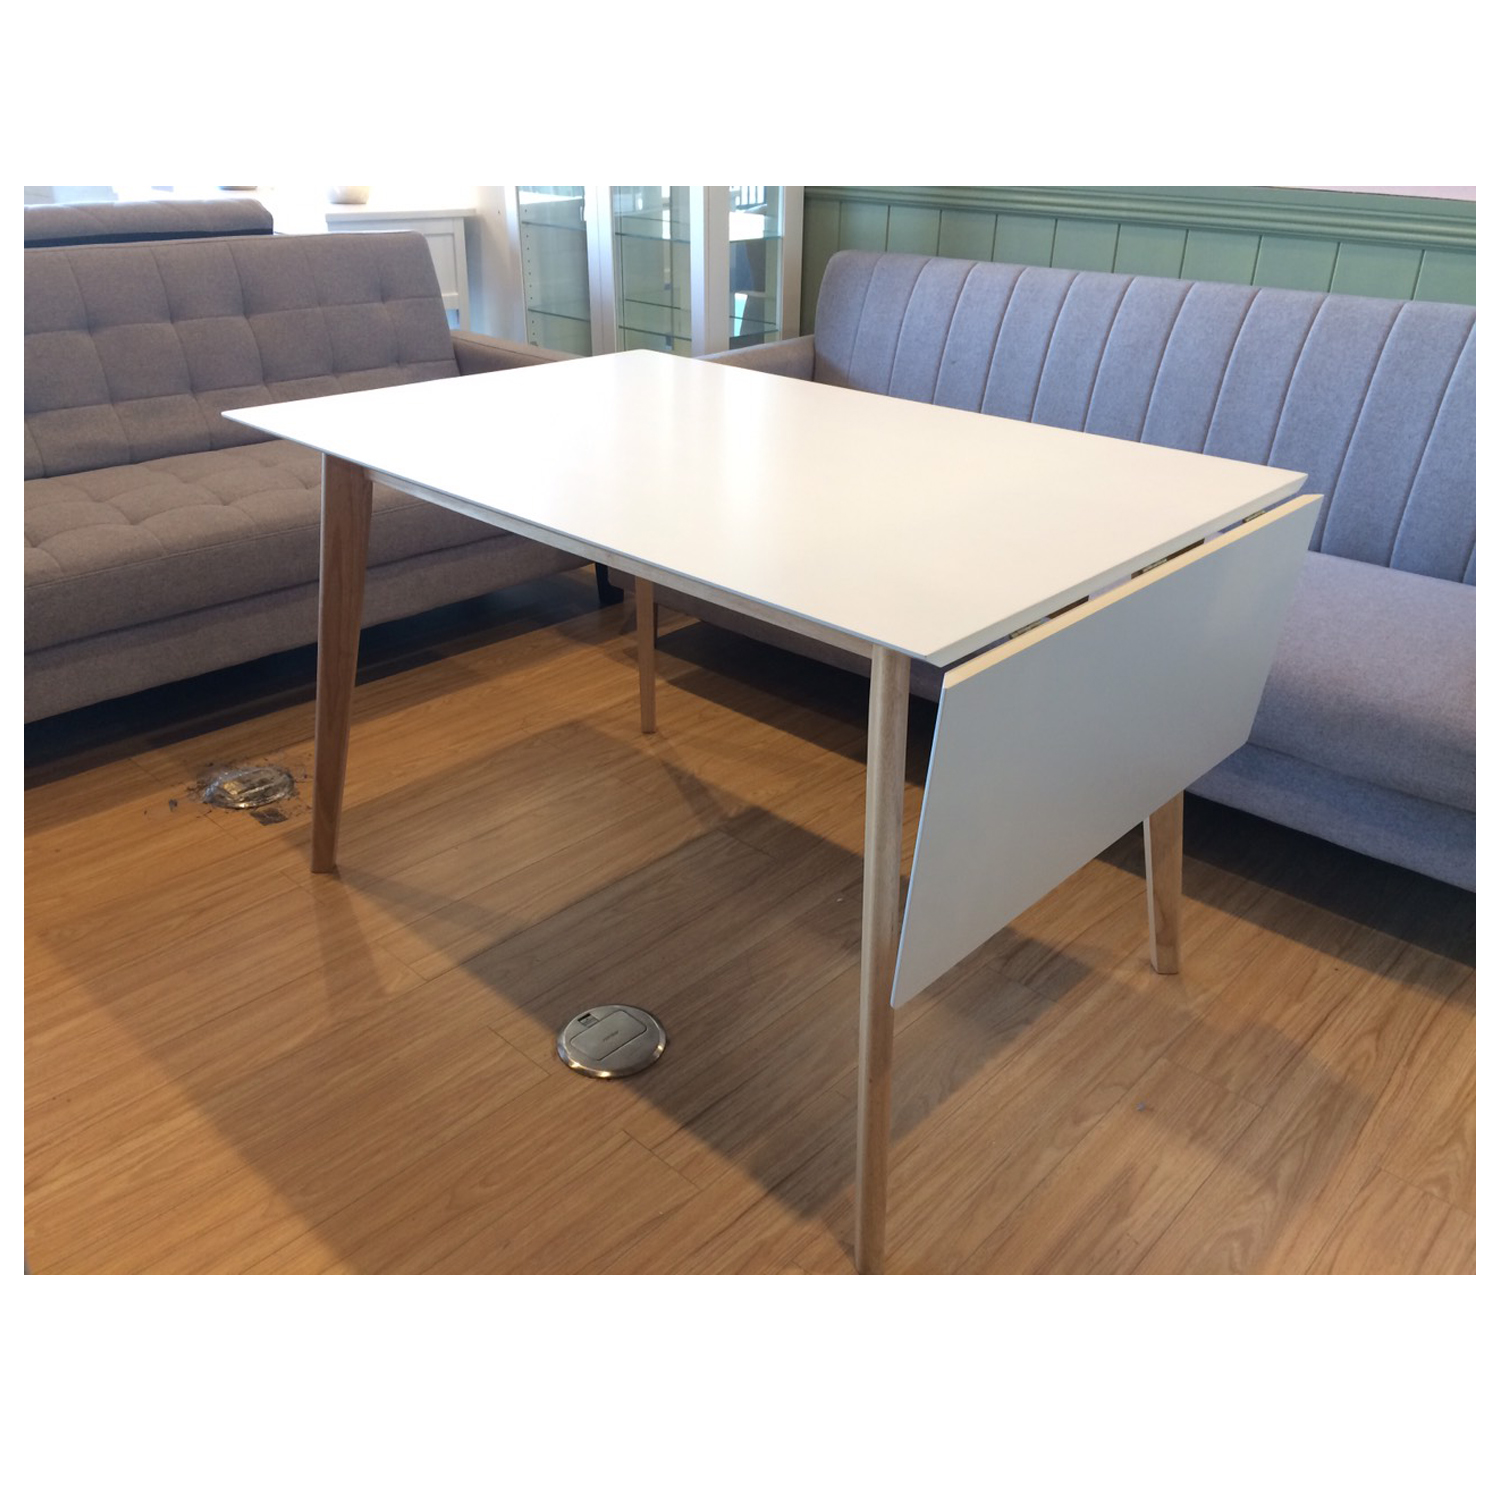 Furniture Source Philippines Melanda Extendable Dining Table White